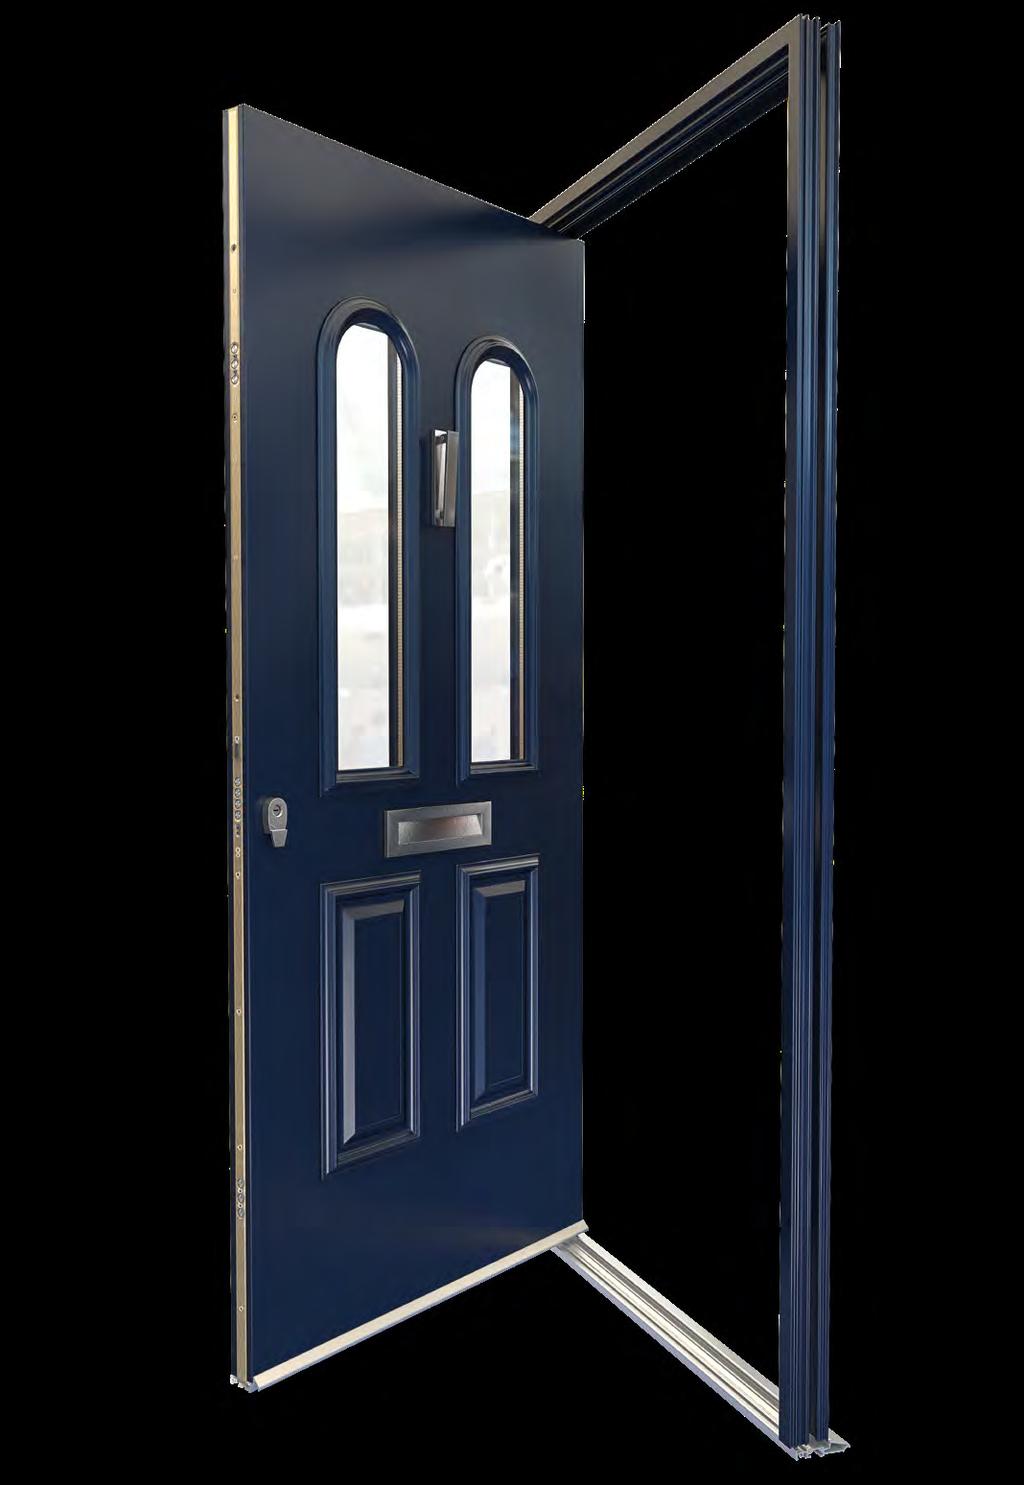 Smart Designer Doors offer a wide range of designs, colours and styles for you to choose from.